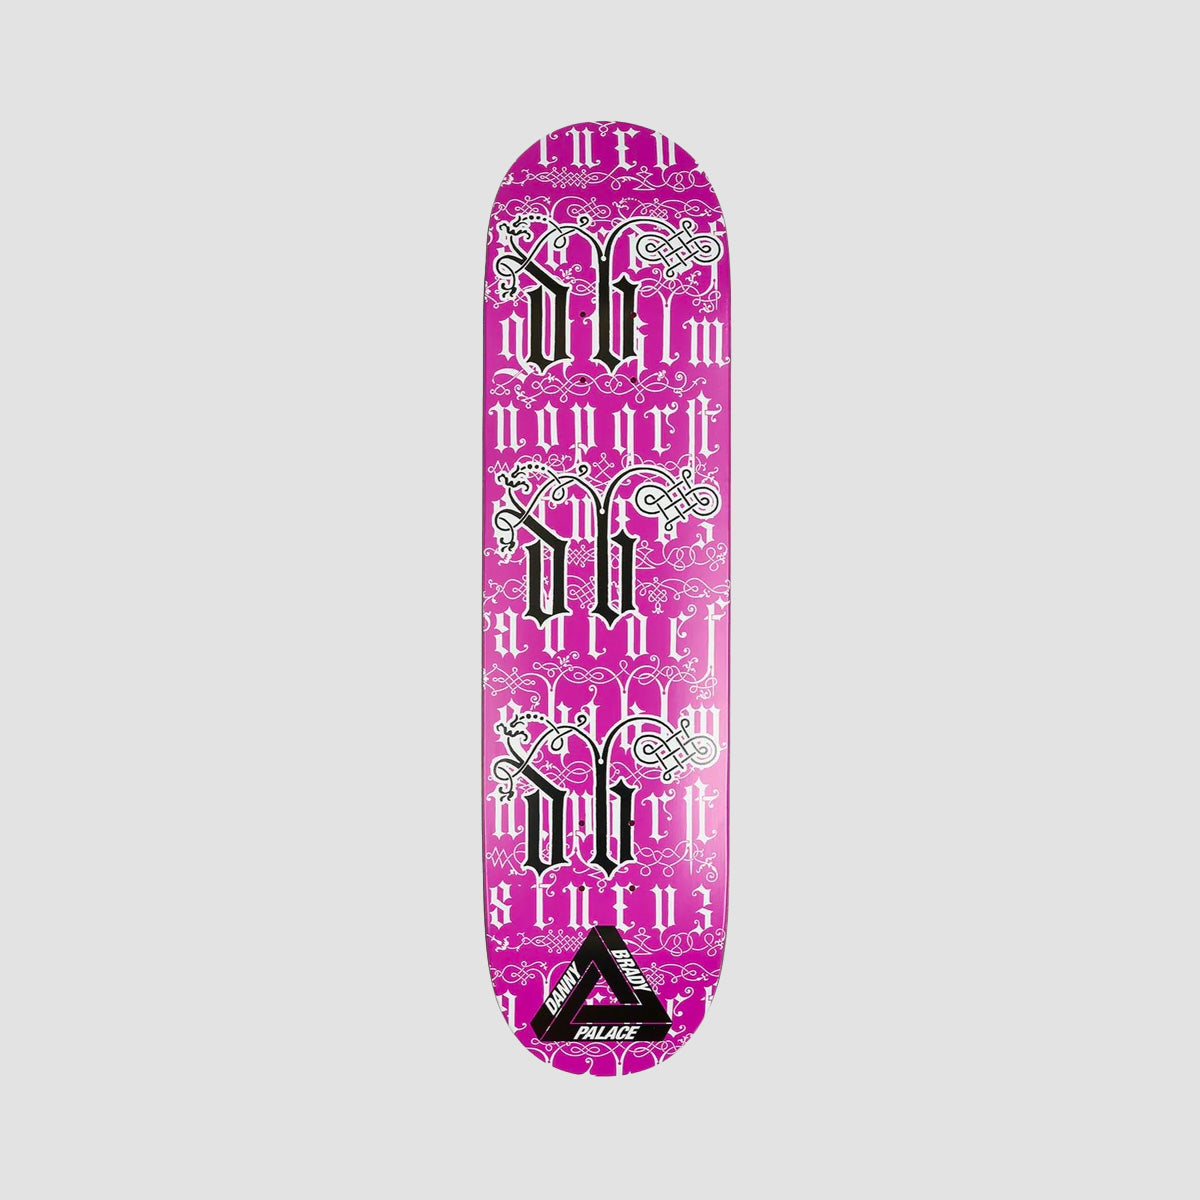 Palace Lucien Clarke Pro S13 Deck in stock at SPoT Skate Shop